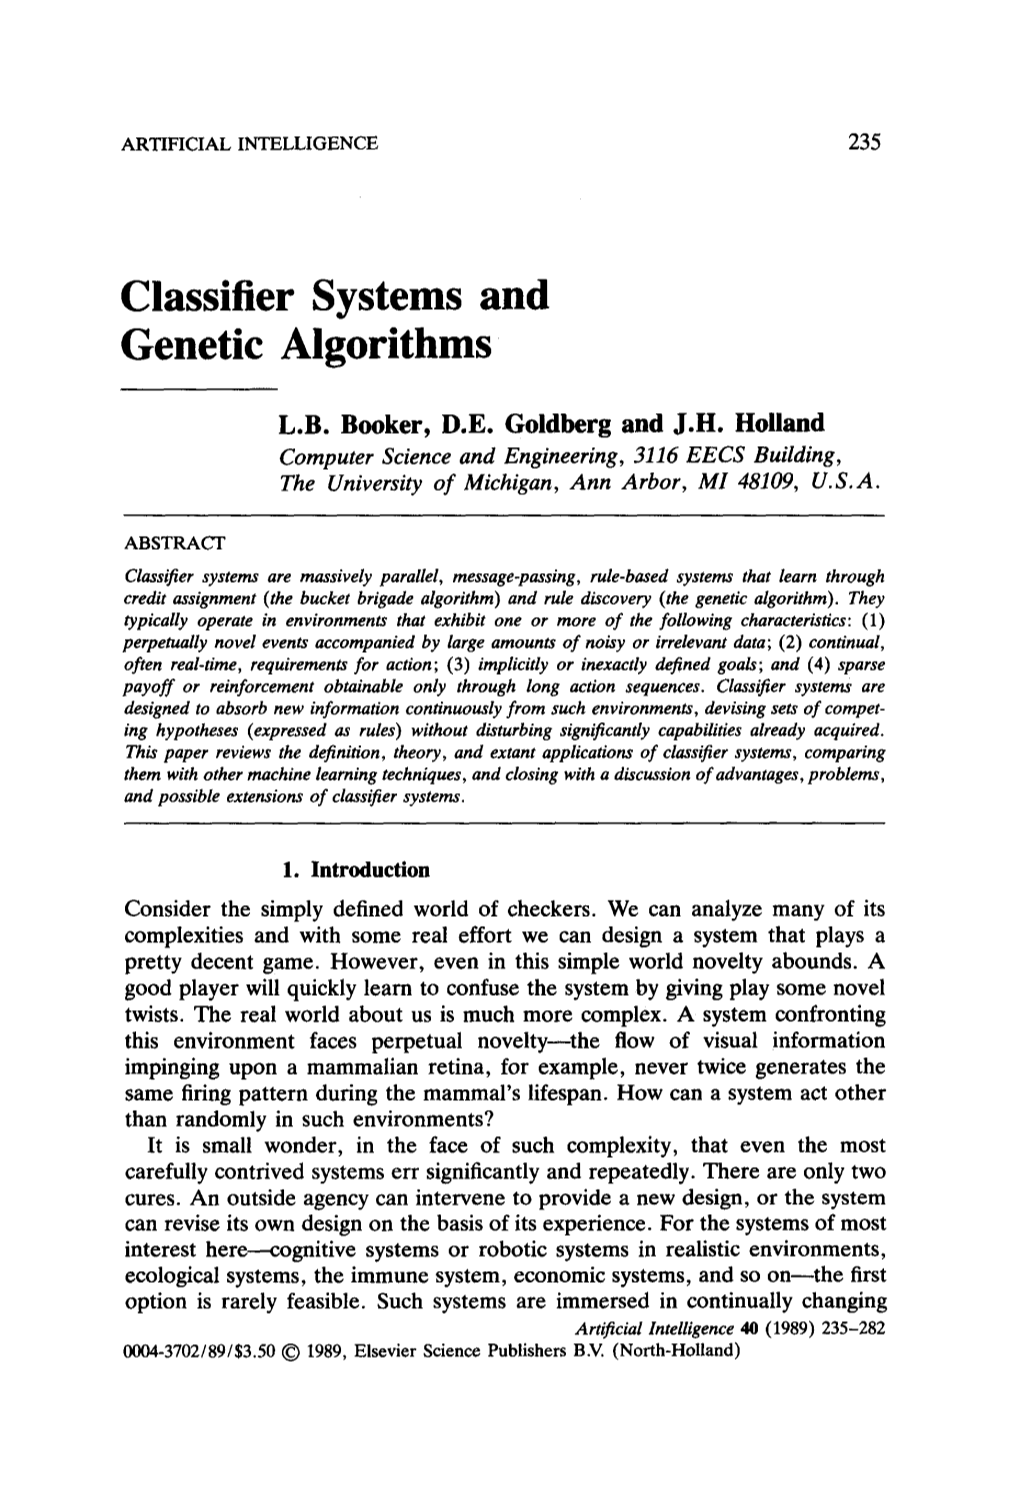 Classifier Systems and Genetic Algorithms